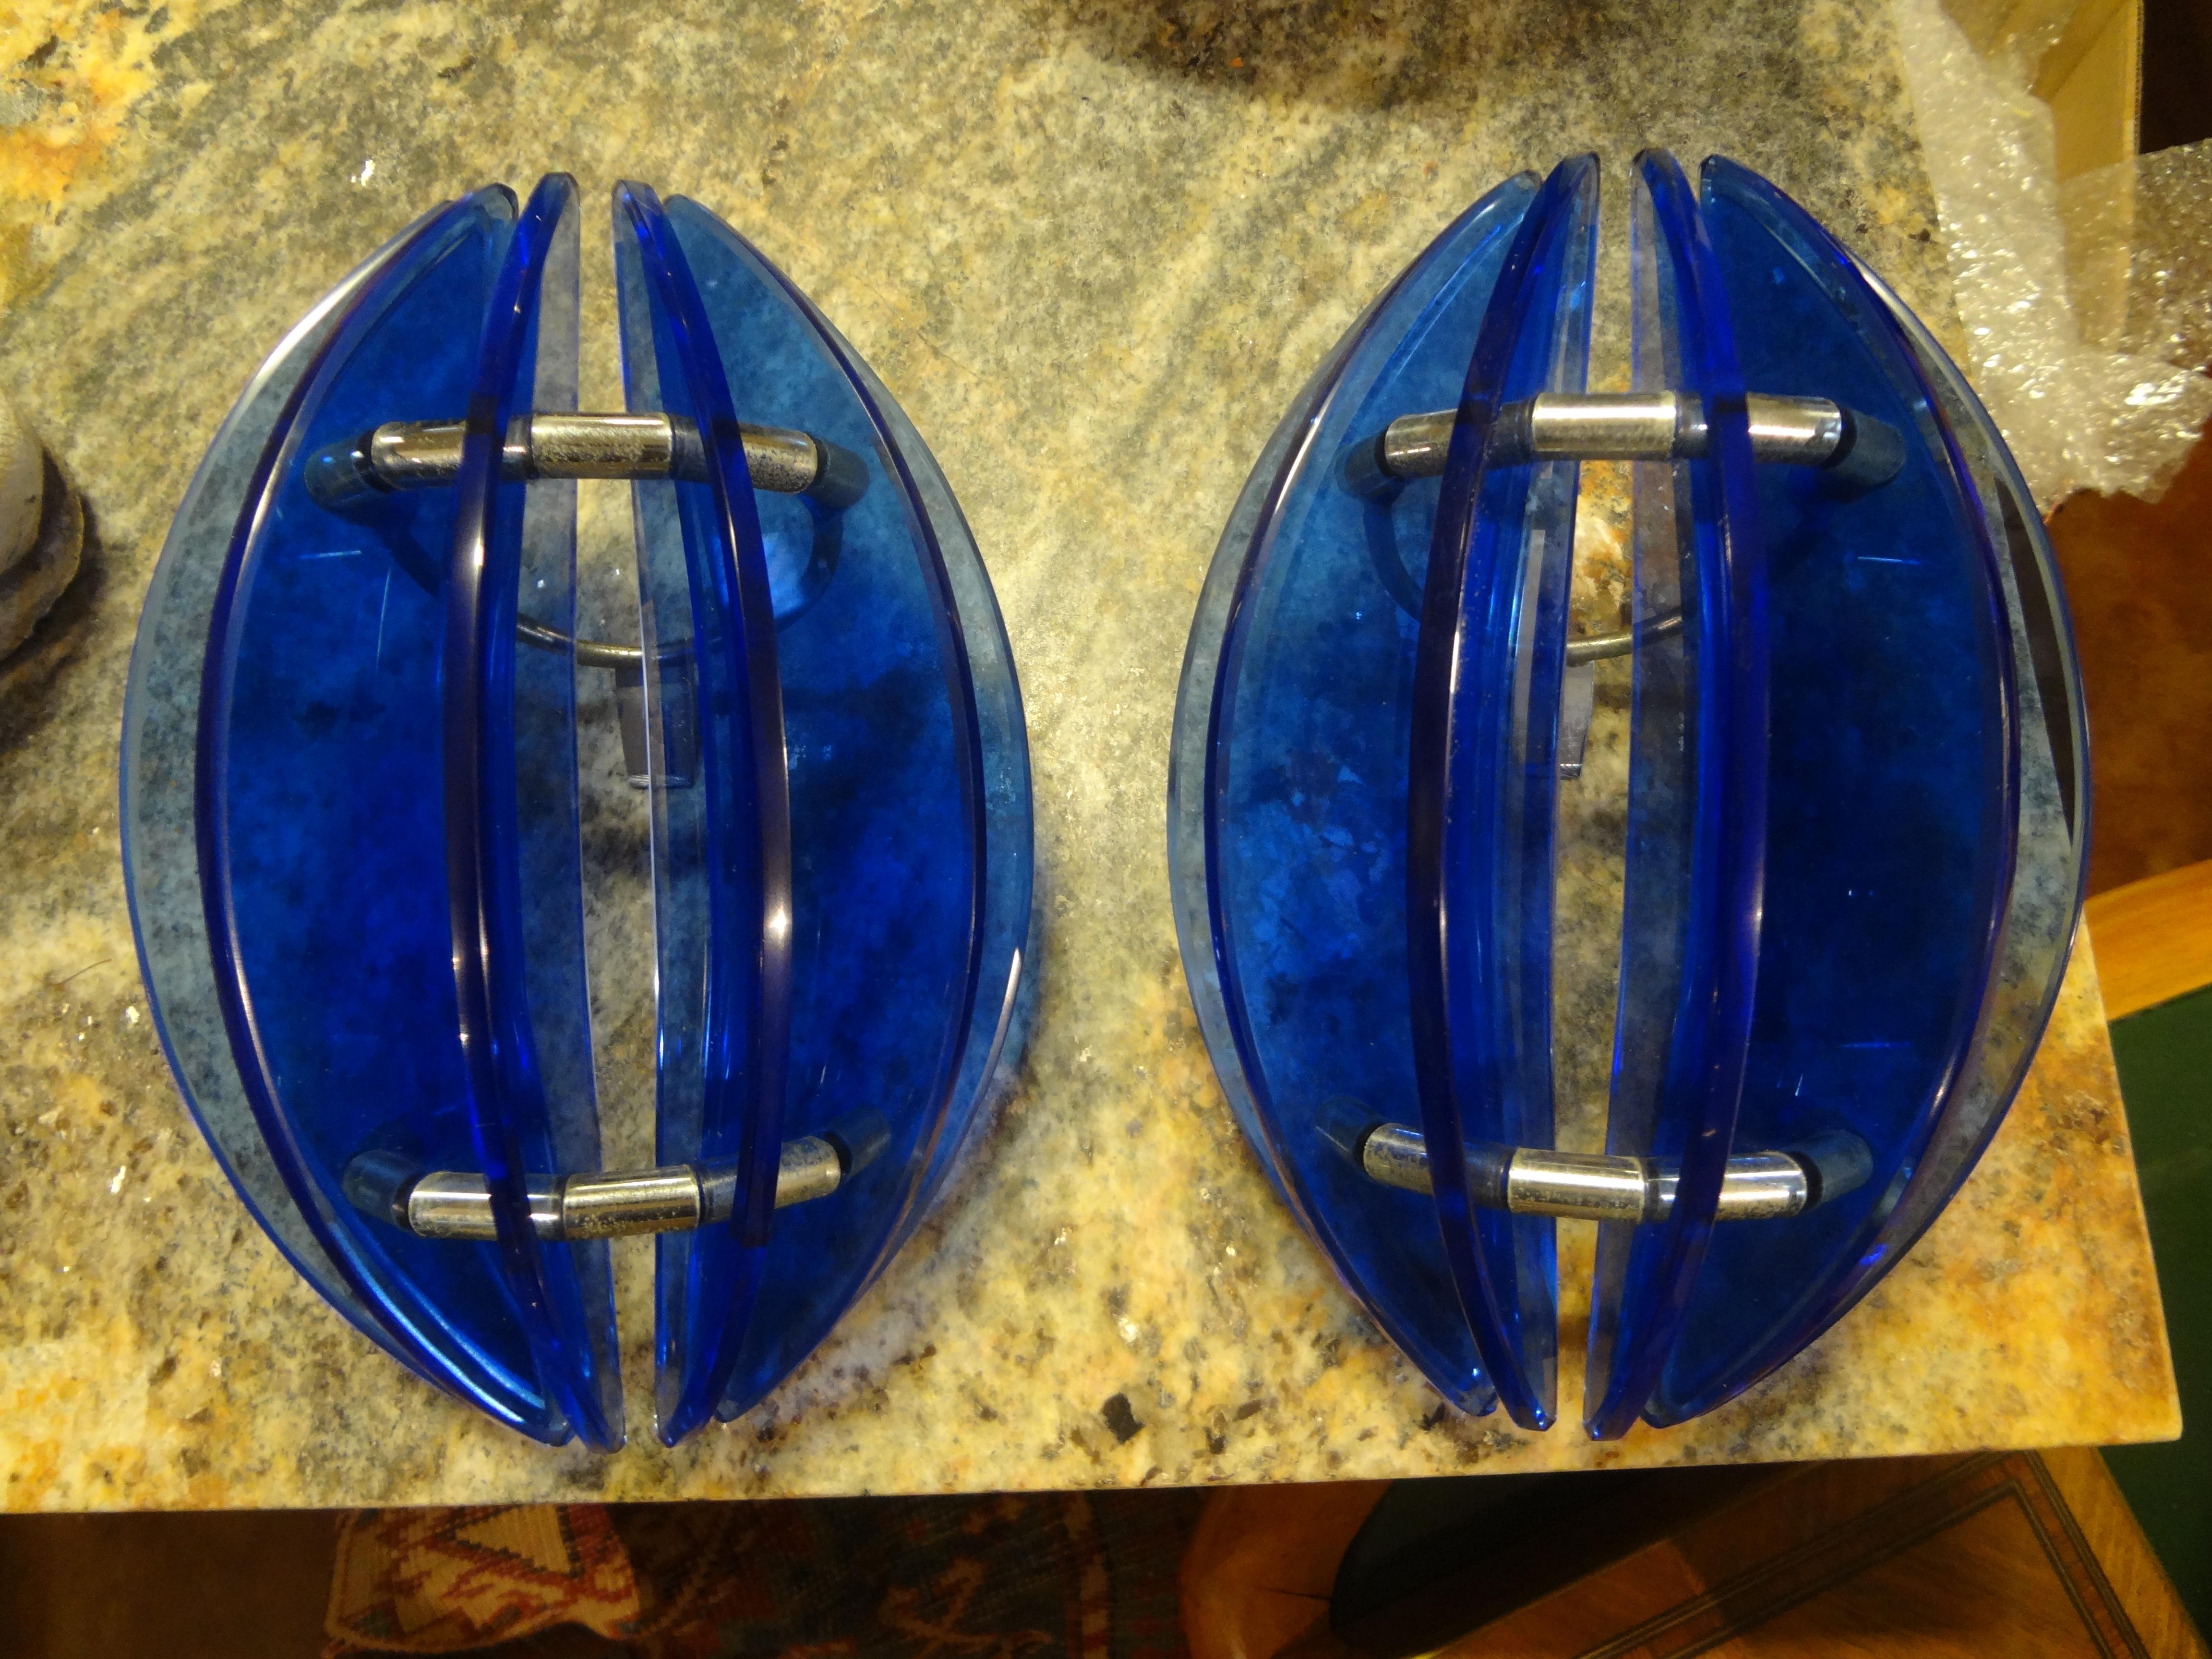 Stunning pair of midcentury Italian cobalt blue glass sconces by Veca. These beautiful Italian Fontana Arte style sconces are comprised of sheets of cobalt blue glass on chrome structures. Our Italian modern glass sconces have been newly wired to